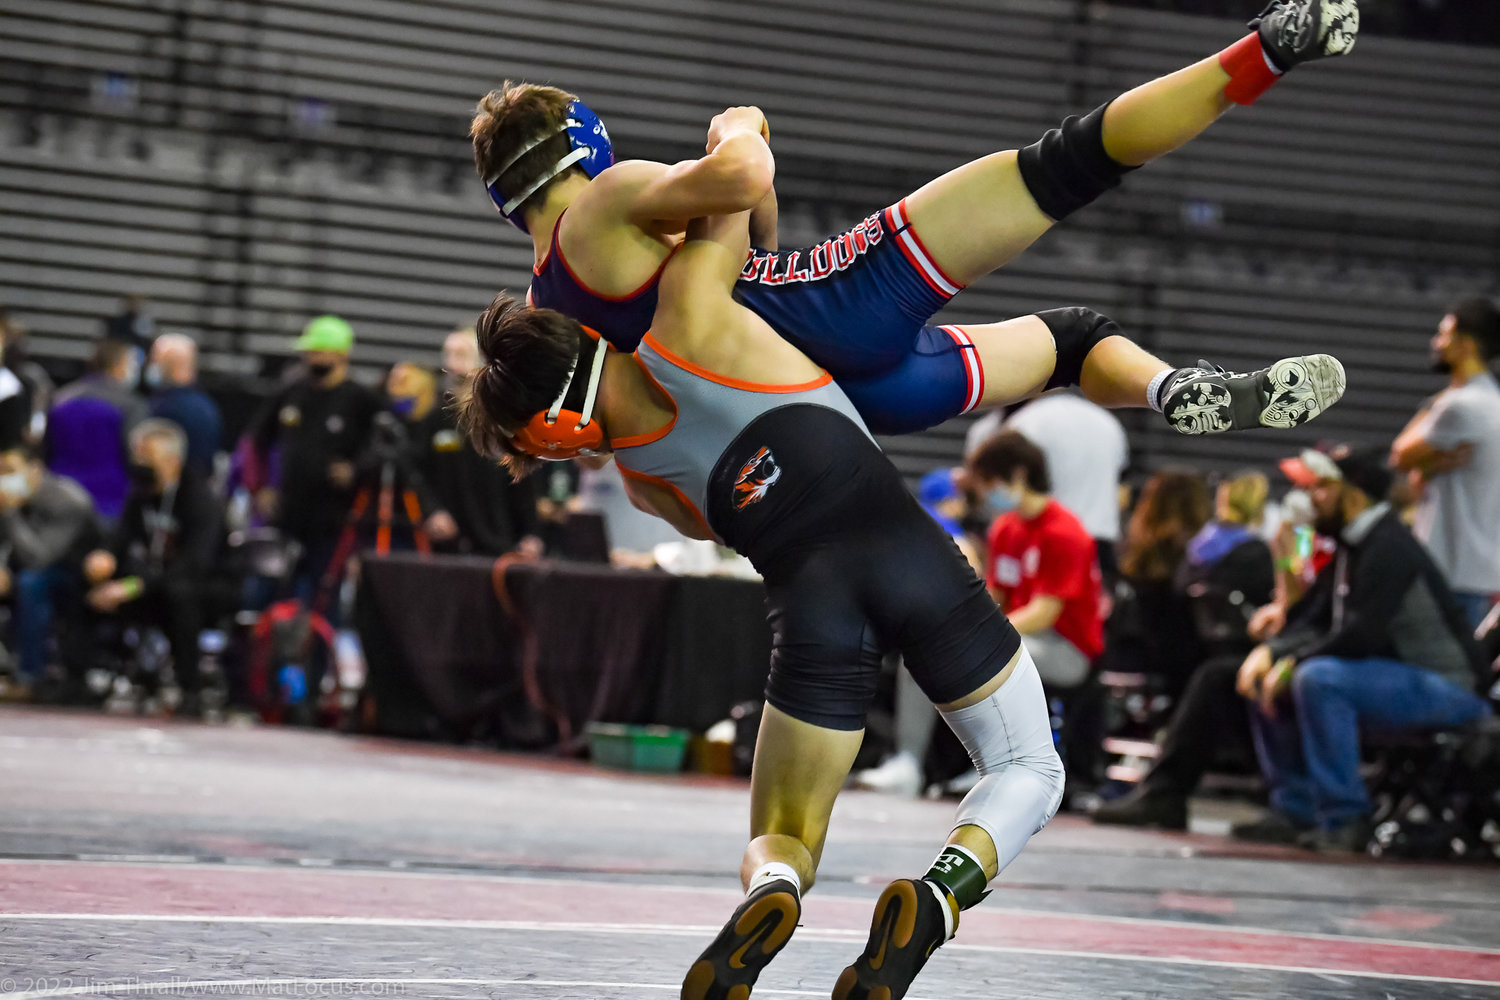 Centralia's Antonio Campos slams an opponent during Mat Classic XXXIII on Friday at the Tacoma Dome.